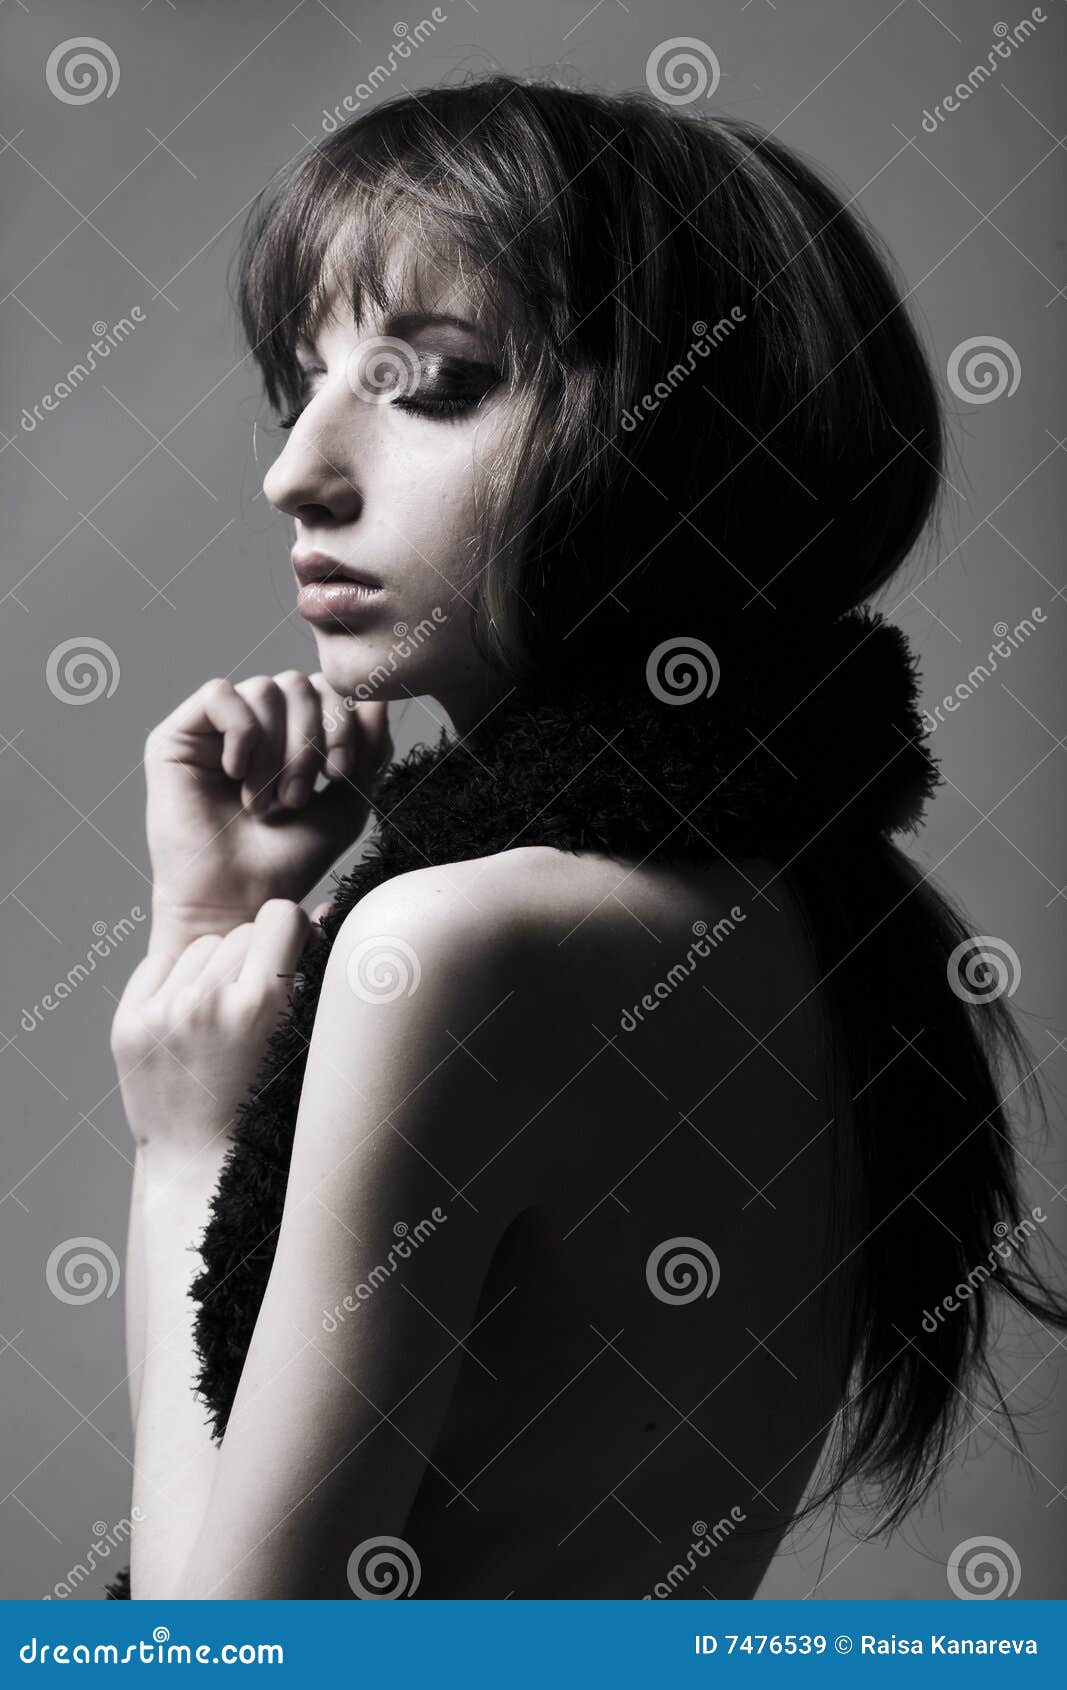 Slim Sexy Brunette Royalty Free Stock Images - Image: 7476539